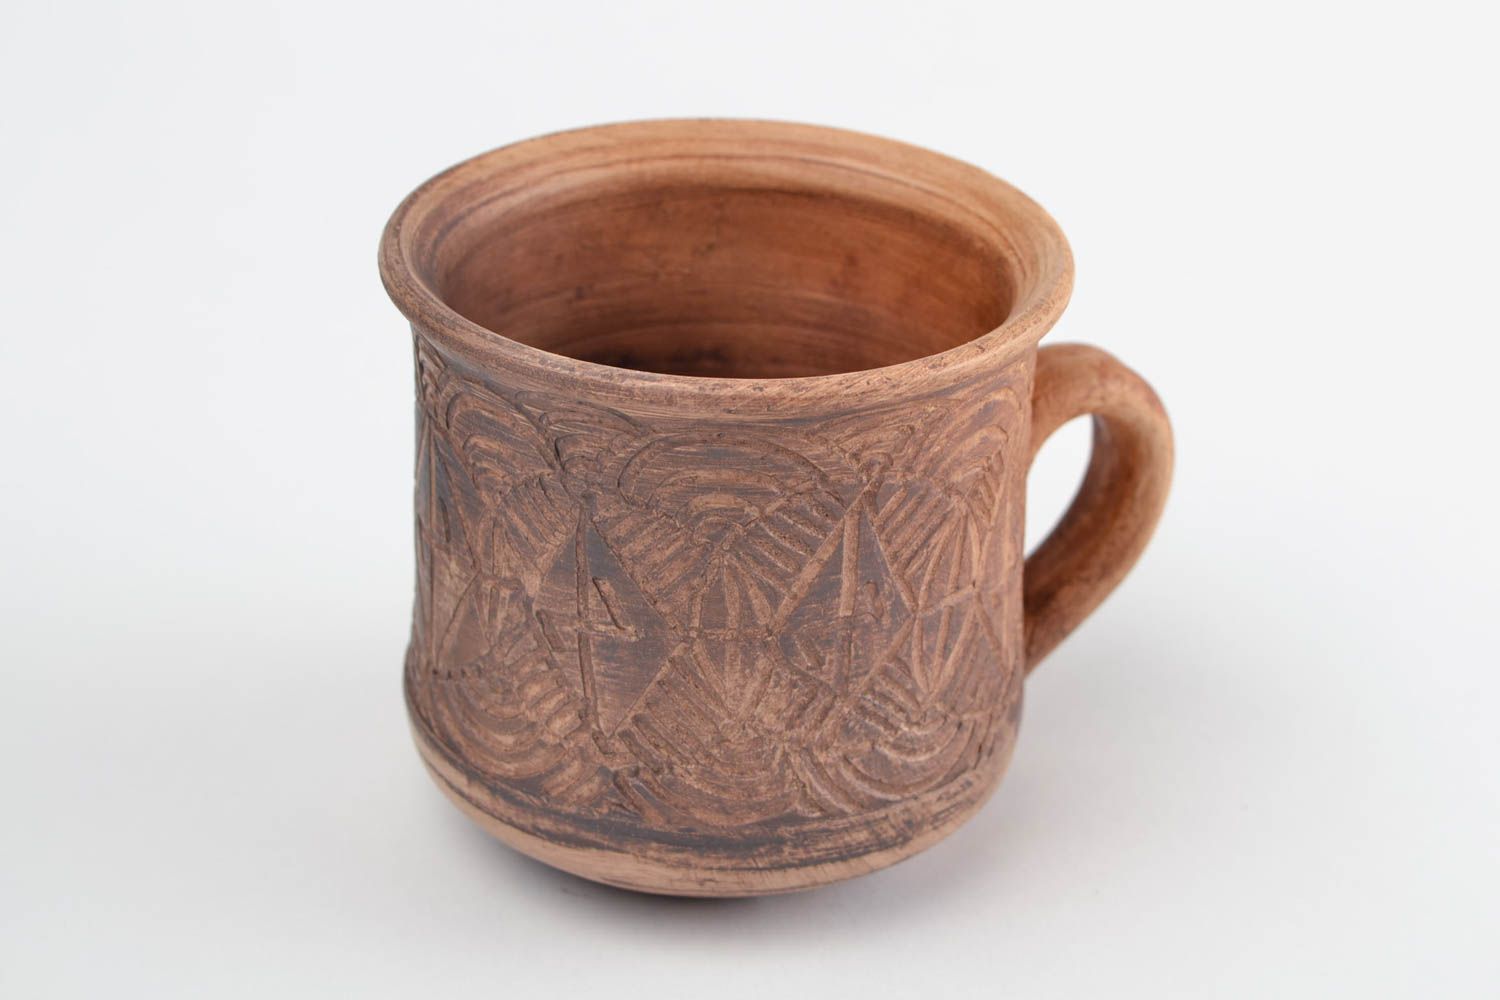 Medium size 5 oz clay cup with handle and rustic pattern photo 5